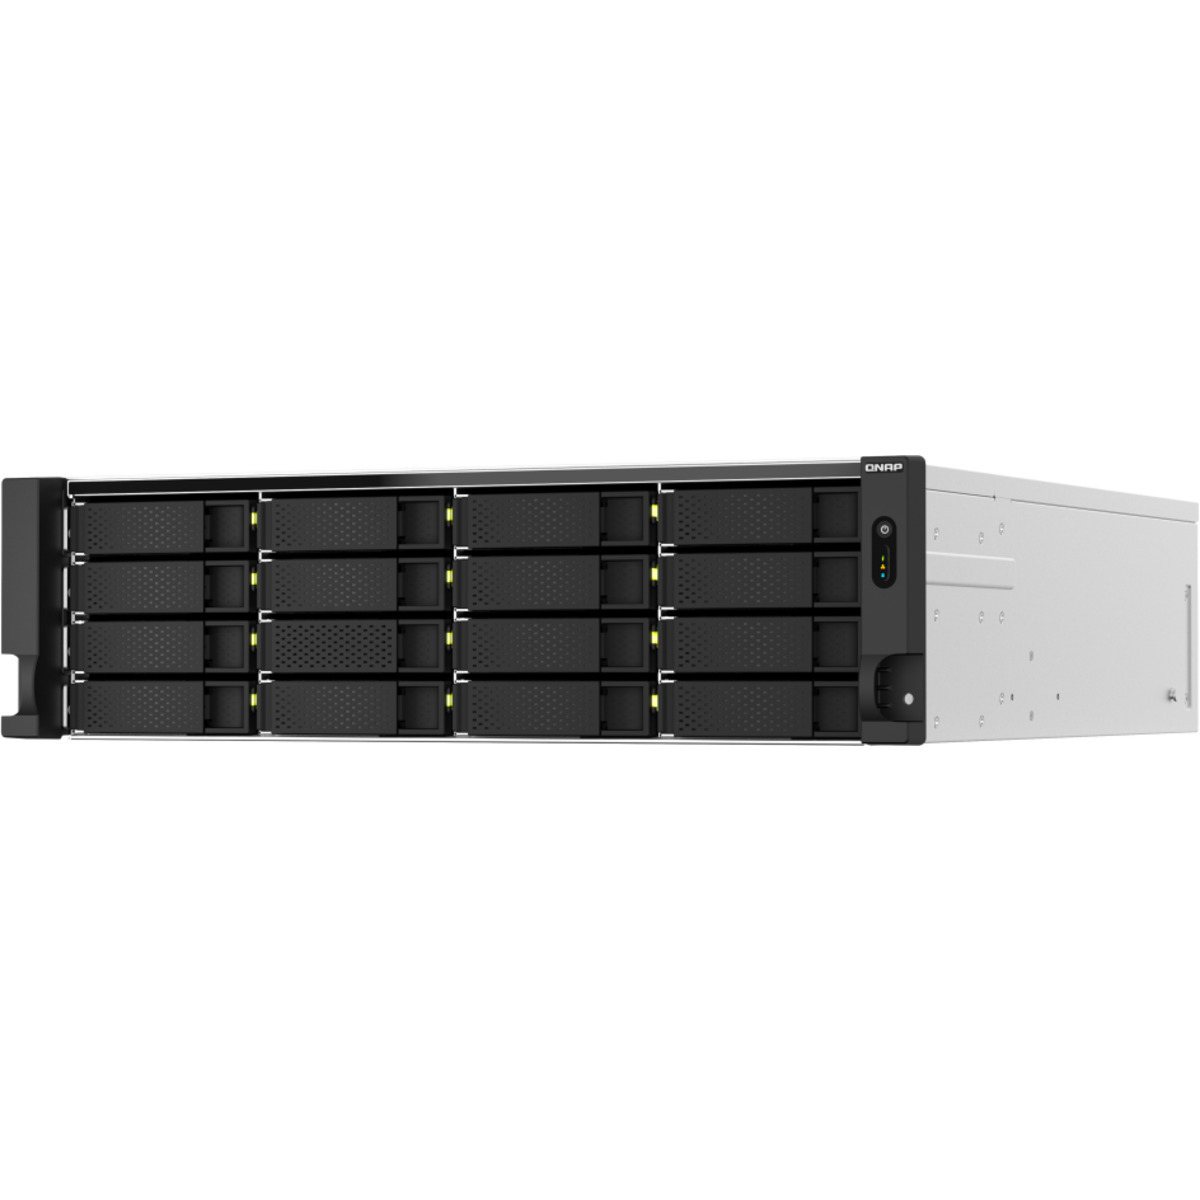 QNAP TS-h2287XU-RP E-2378 QuTS hero Edition 44tb 16+6-Bay RackMount Large Business / Enterprise NAS - Network Attached Storage Device 11x4tb Seagate IronWolf ST4000VN006 3.5 5400rpm SATA 6Gb/s HDD NAS Class Drives Installed - Burn-In Tested TS-h2287XU-RP E-2378 QuTS hero Edition